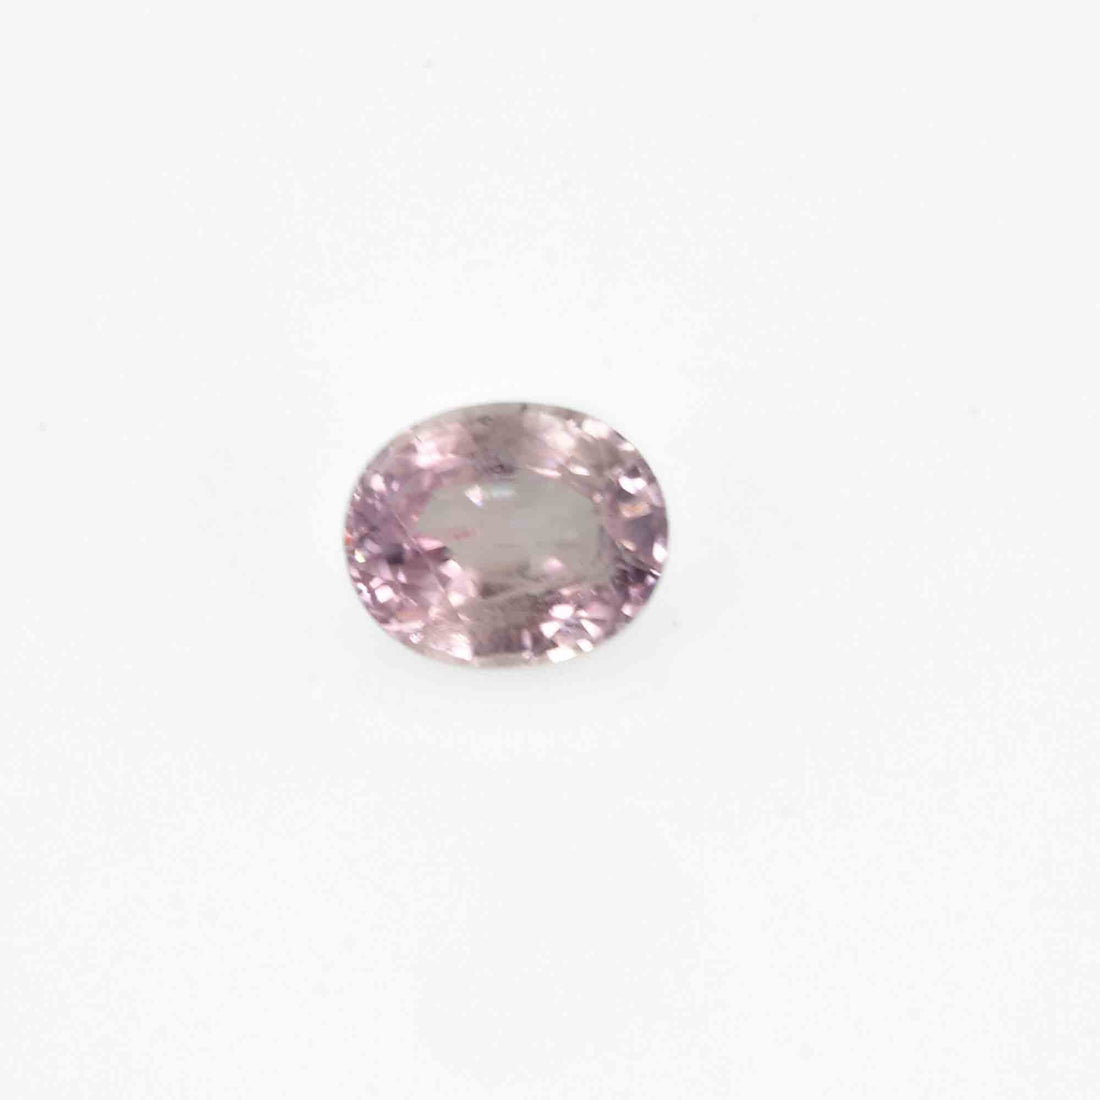 0.67 Cts Natural Pink Sapphire Loose Gemstone Oval Cut